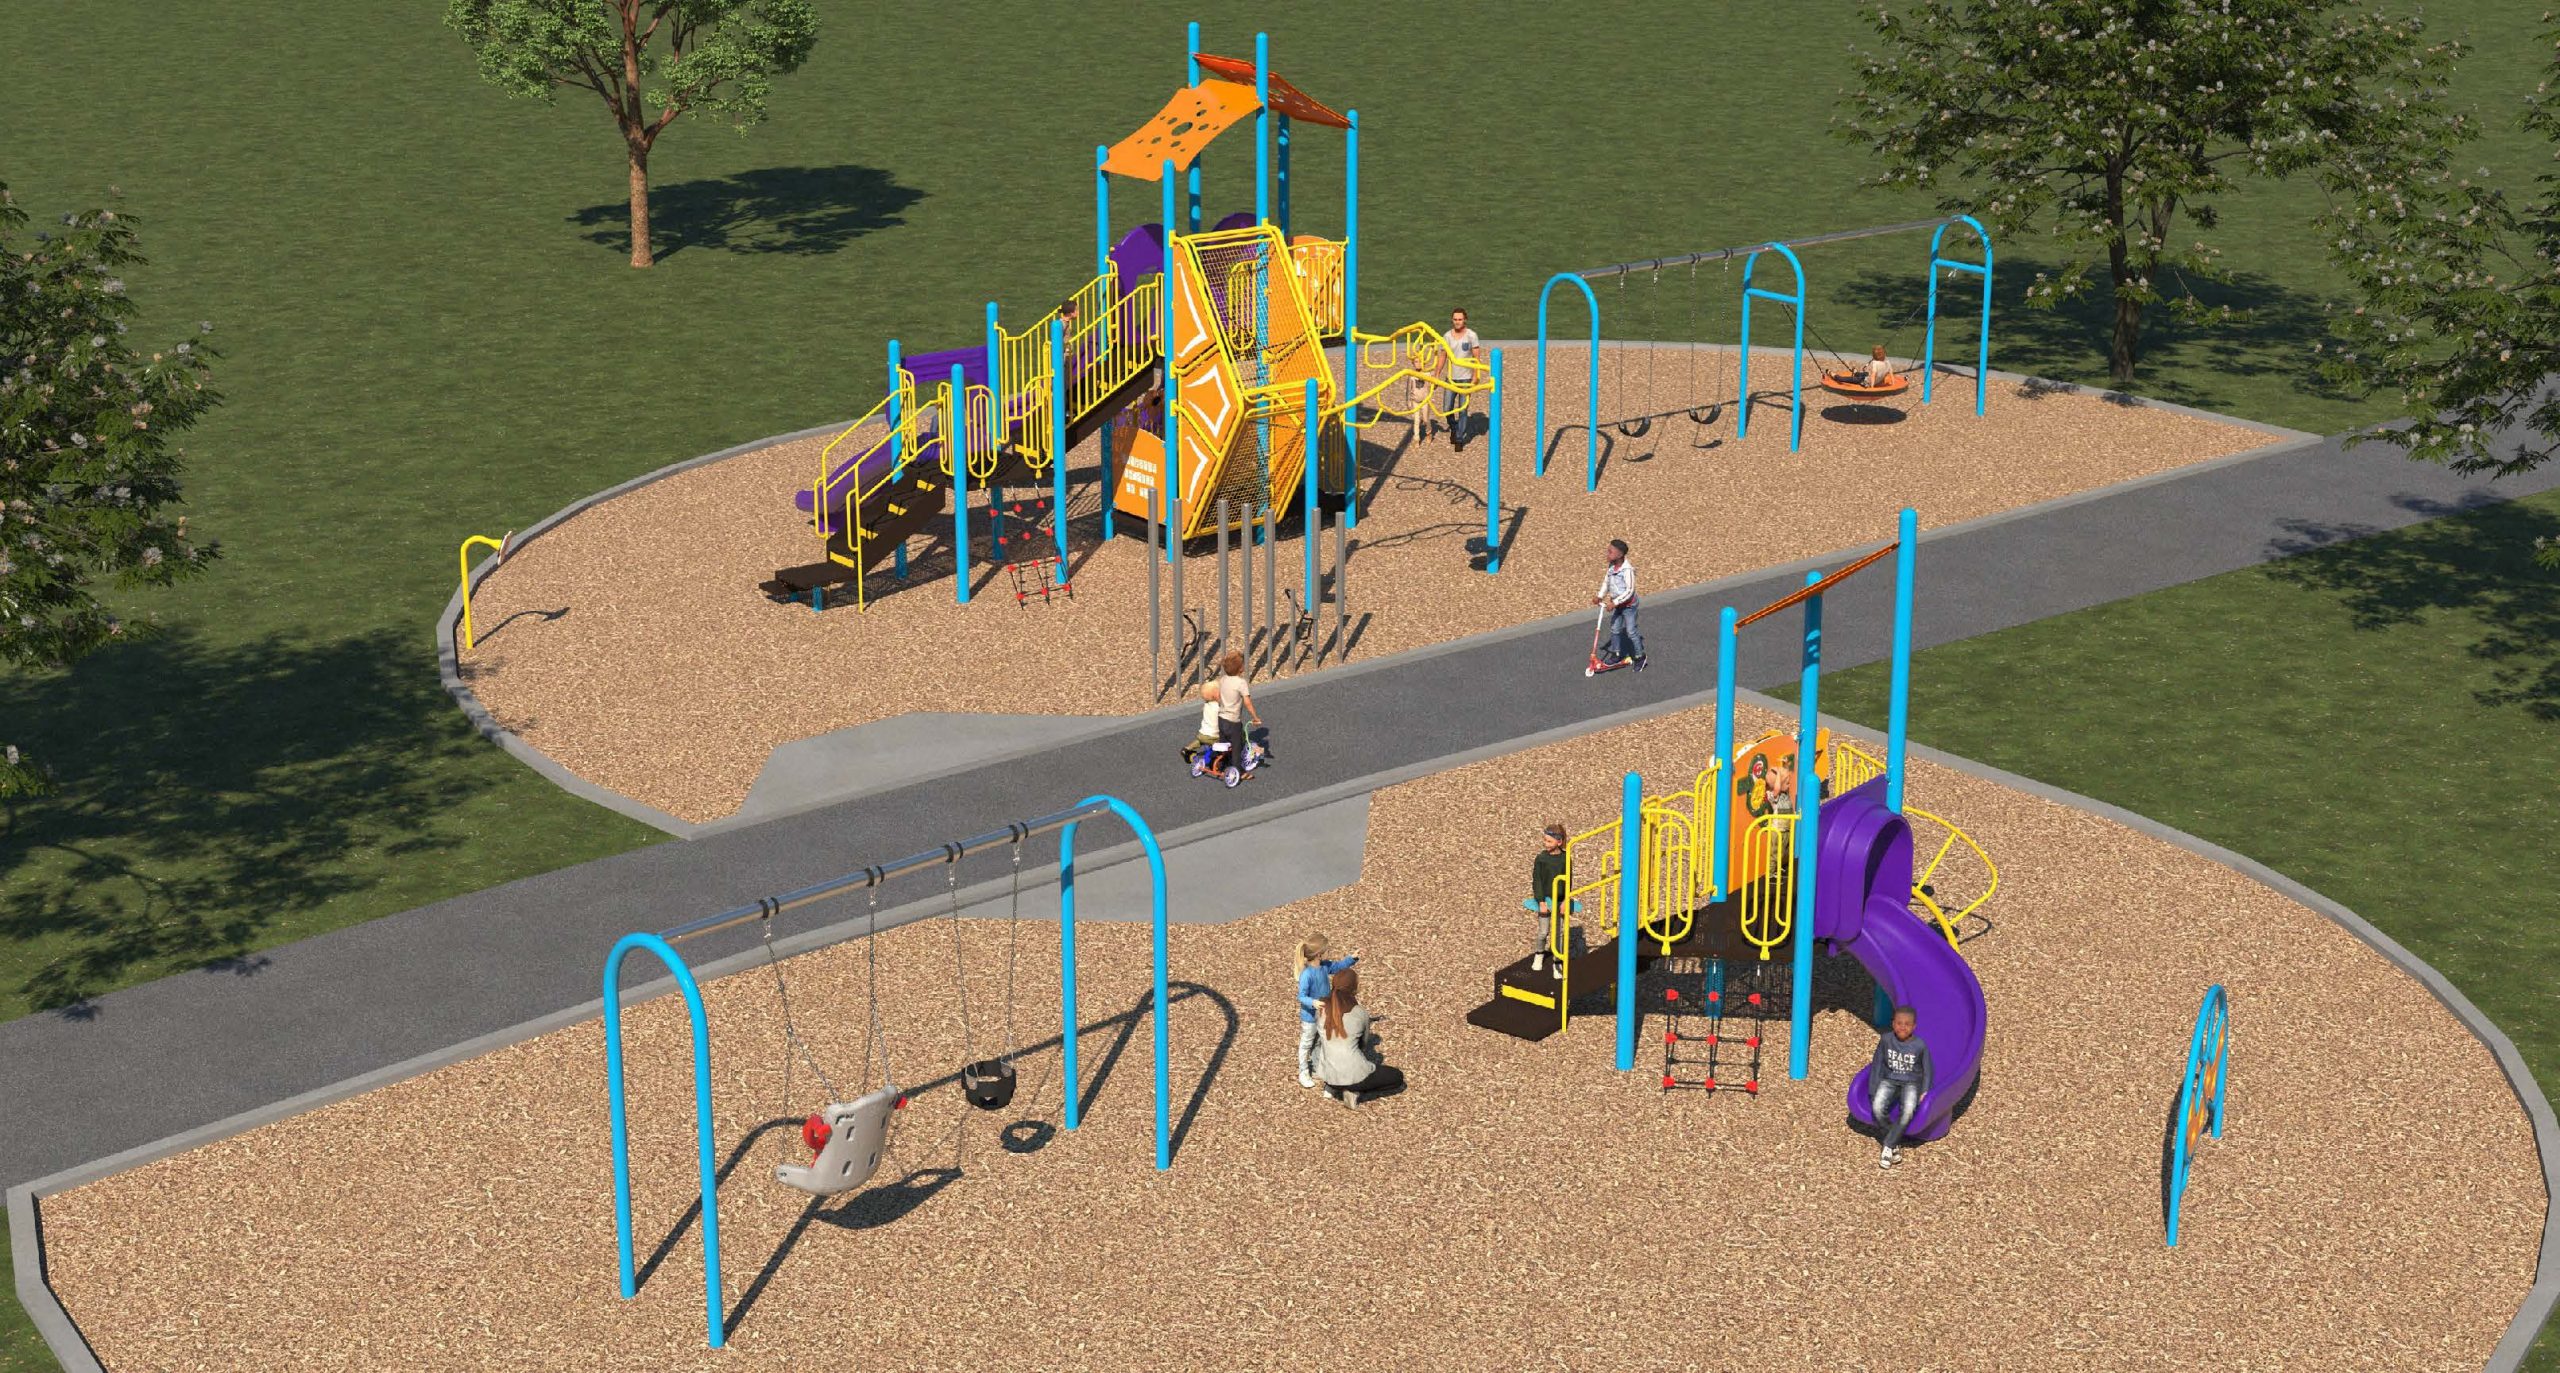 The final design for the new Benner Park Playground, which has been refined based on community feedback. It is a combination of bright colours including yellow, orange, purple and blue, and includes the play features listed below.